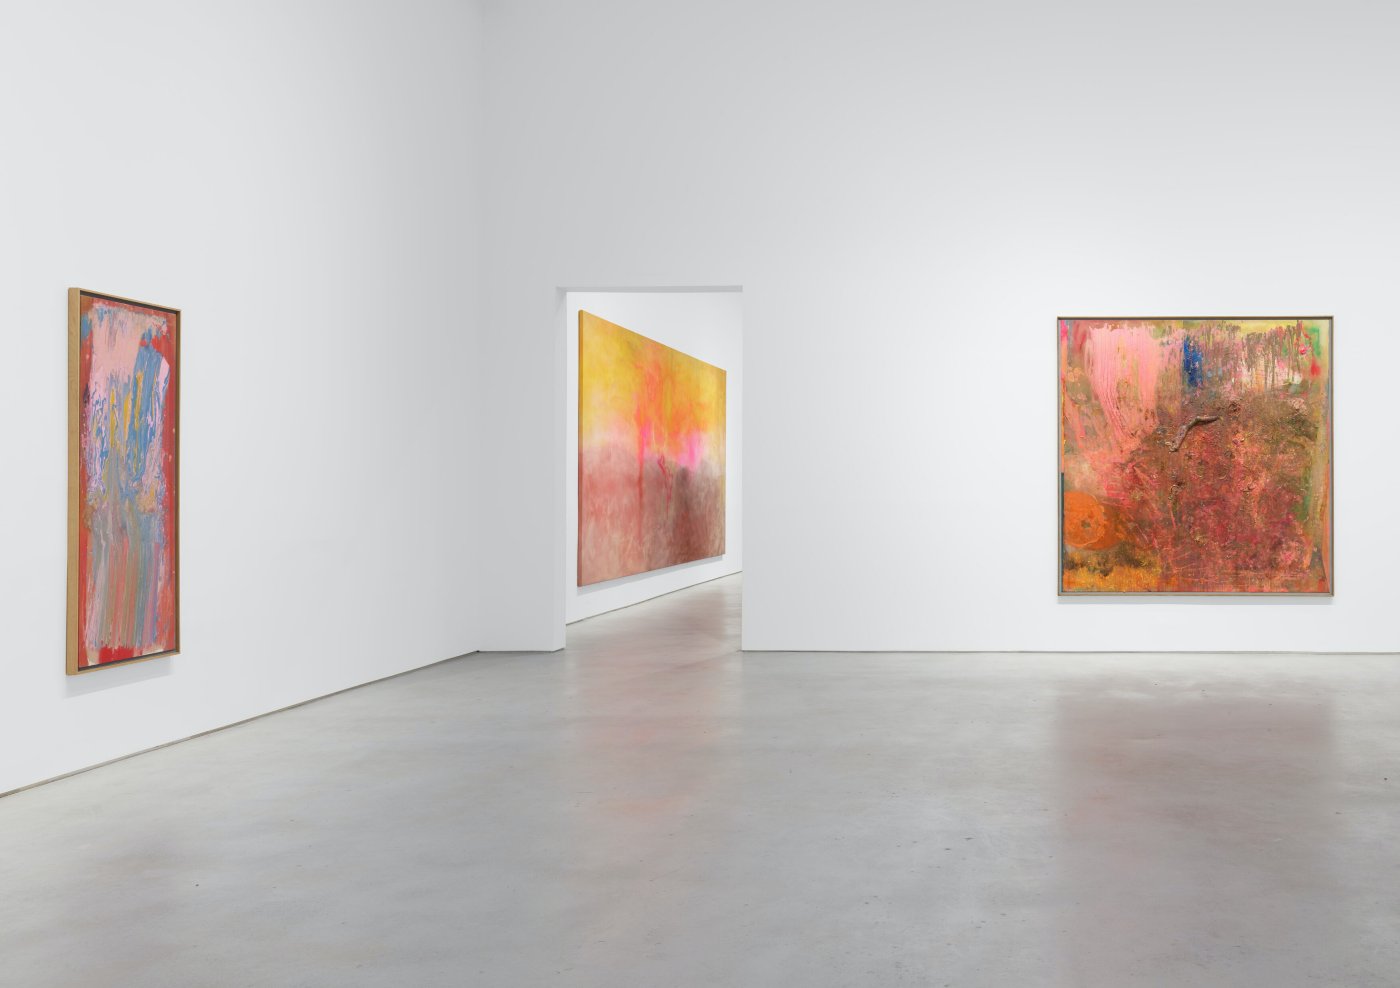 Installation image for Frank Bowling - London / New York, at Hauser & Wirth